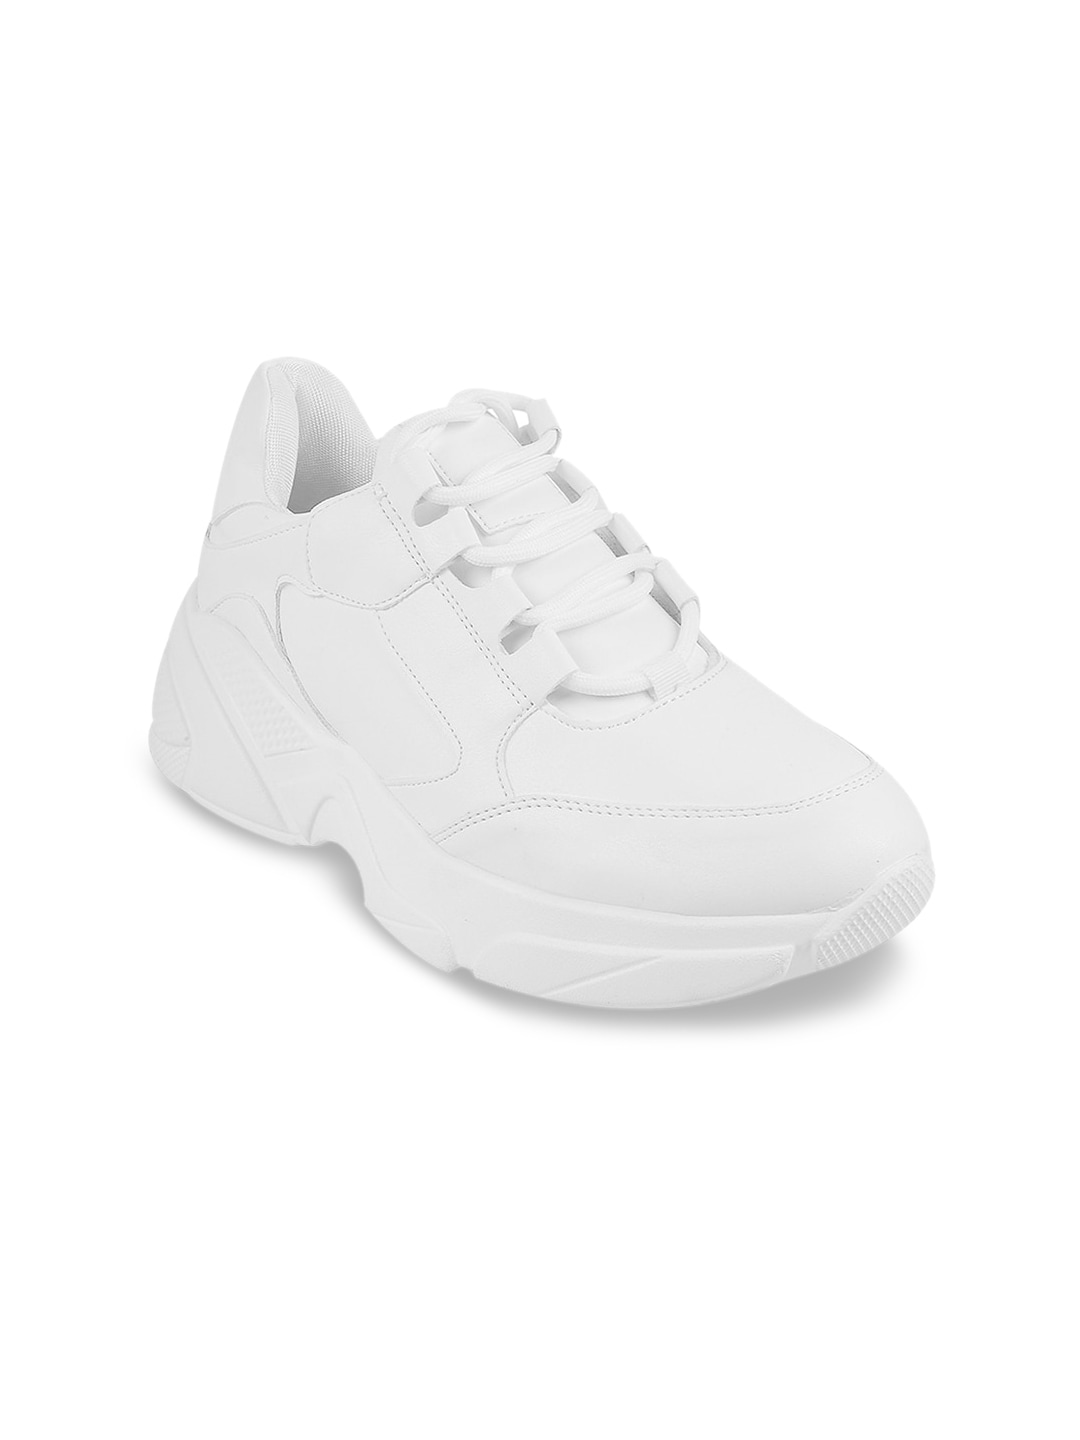 Mochi Women Lace-Up Sneakers Price in India